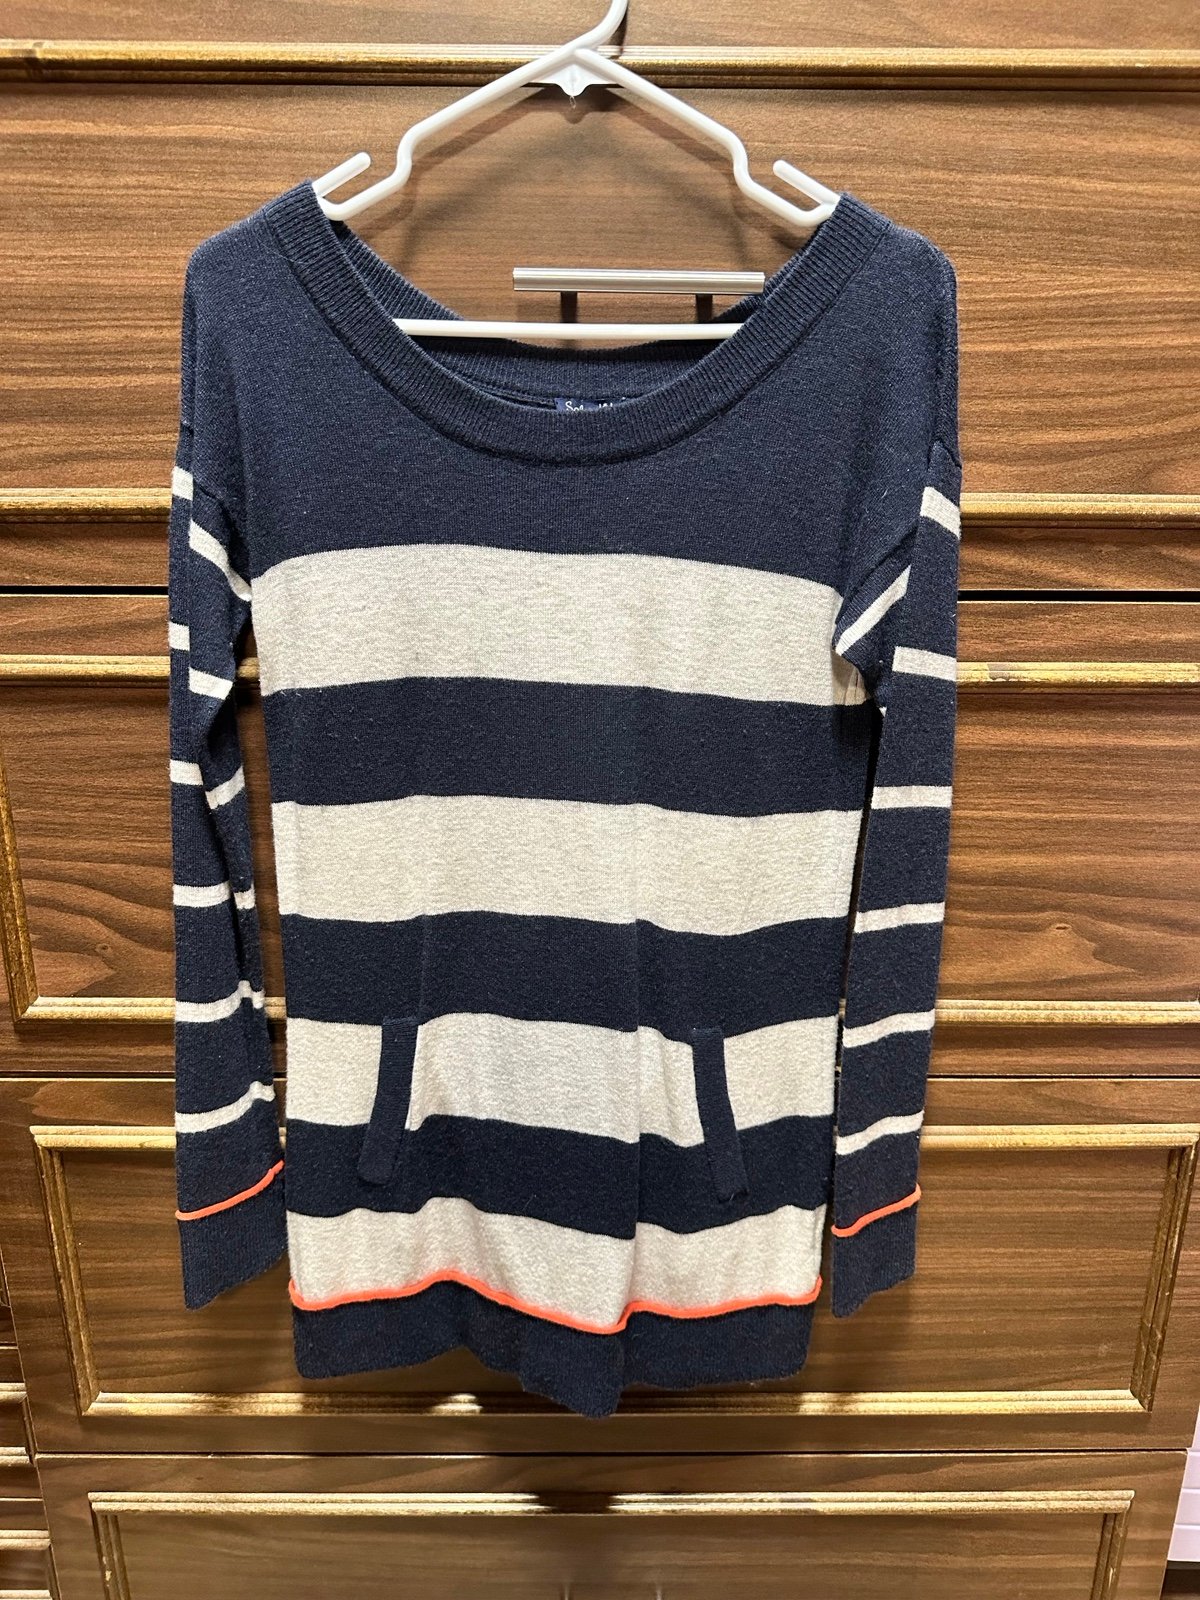 Great Splendid Sweater Size Small frEp5naUH all for you